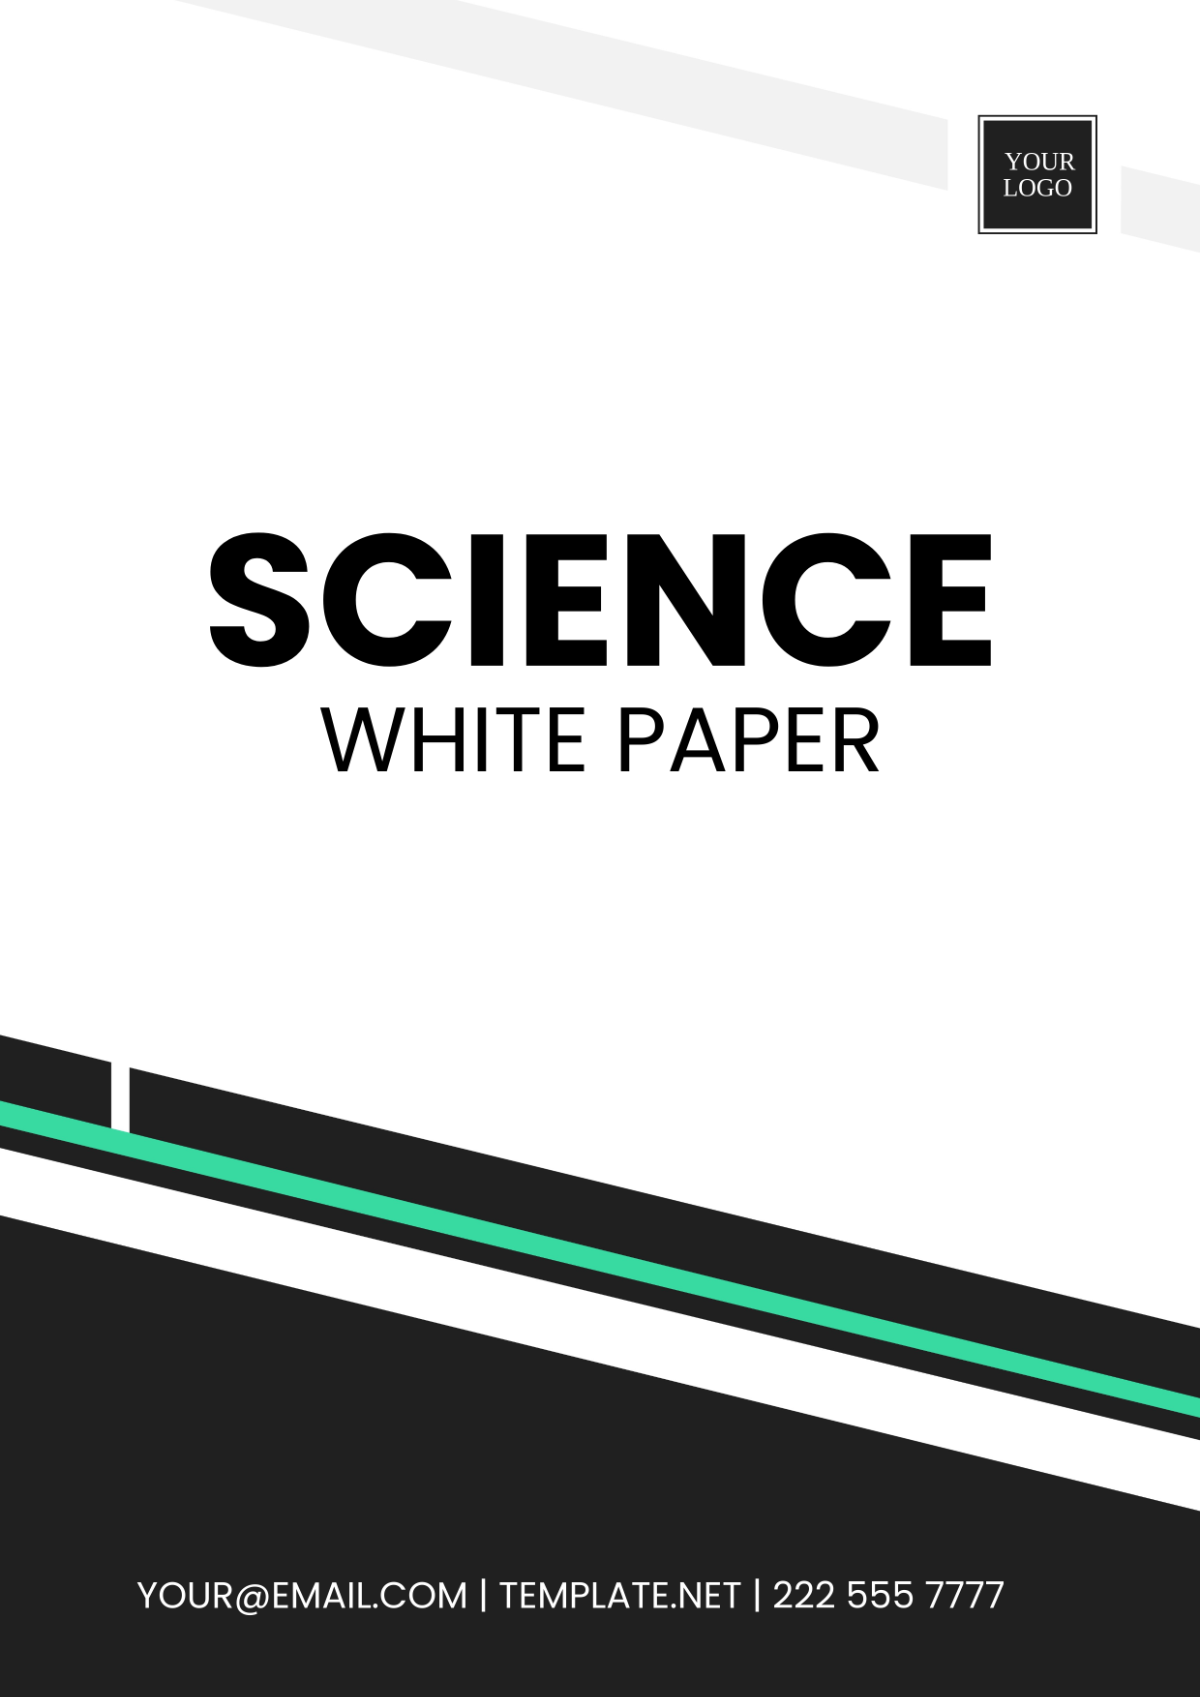 Science White Paper Template